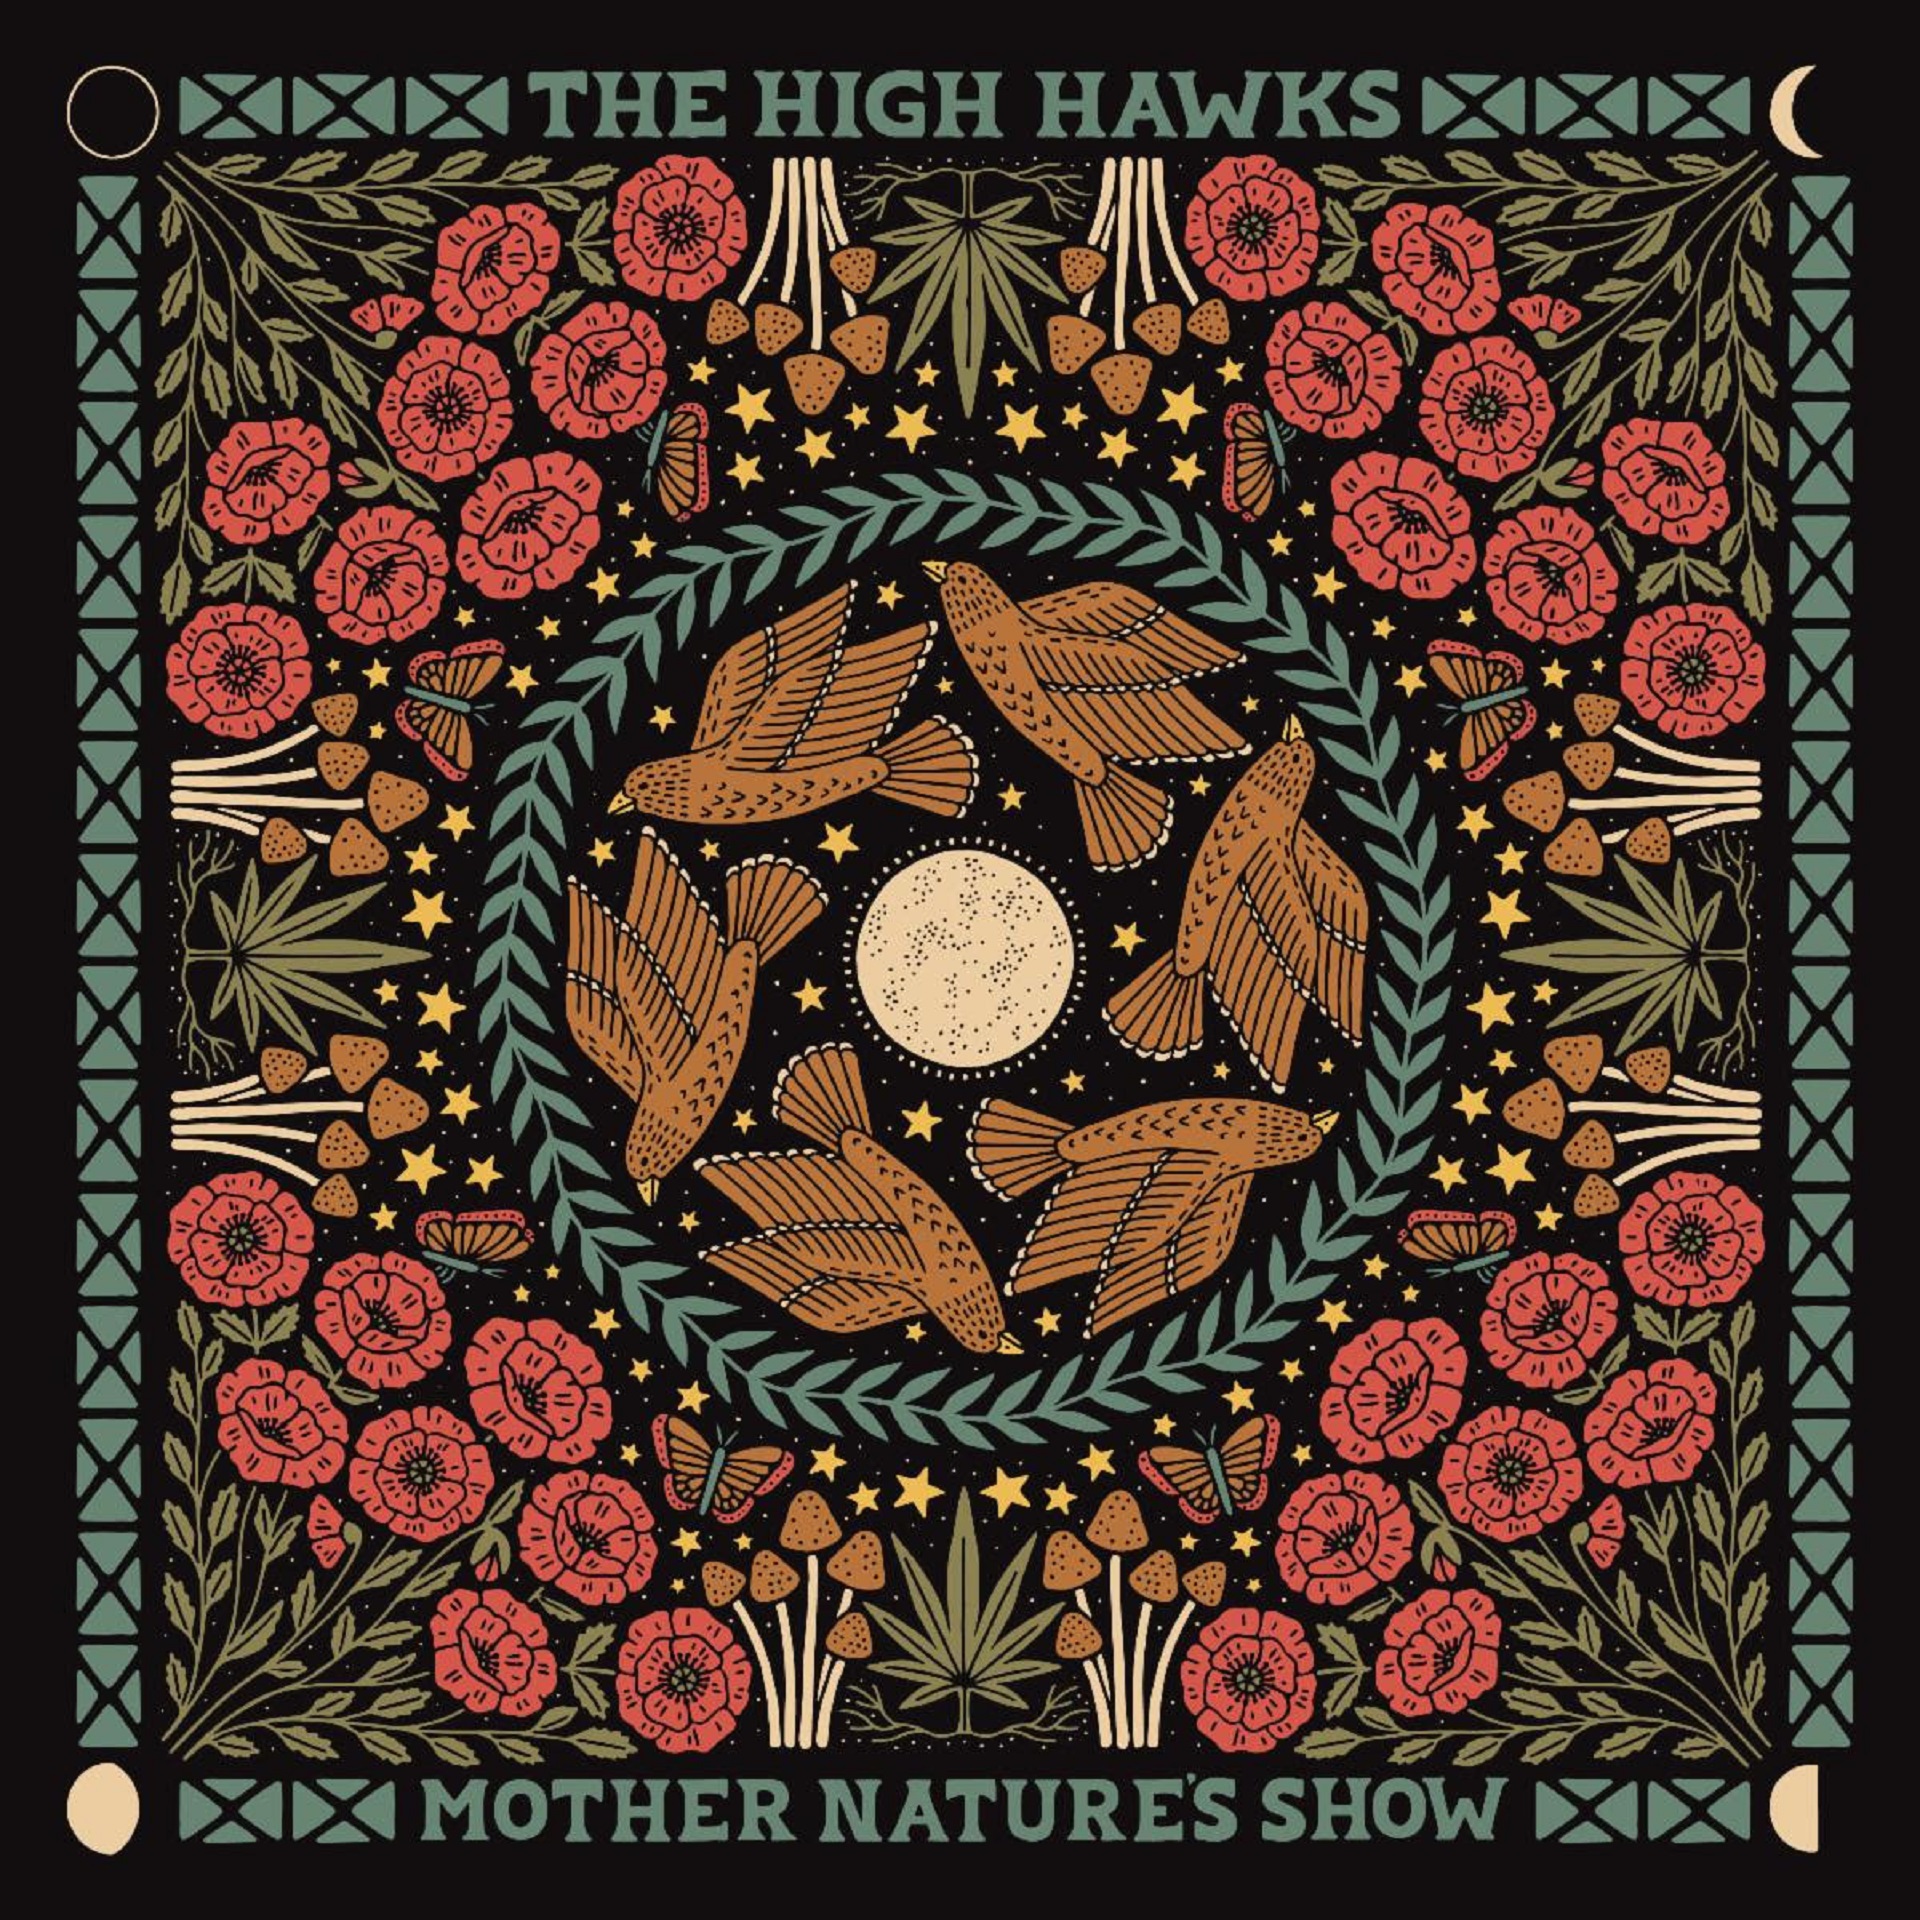 THE HIGH HAWKS - The Super Friends Group Continue to Rise Up The Radio Charts with New Album 'Mother Nature’s Show'